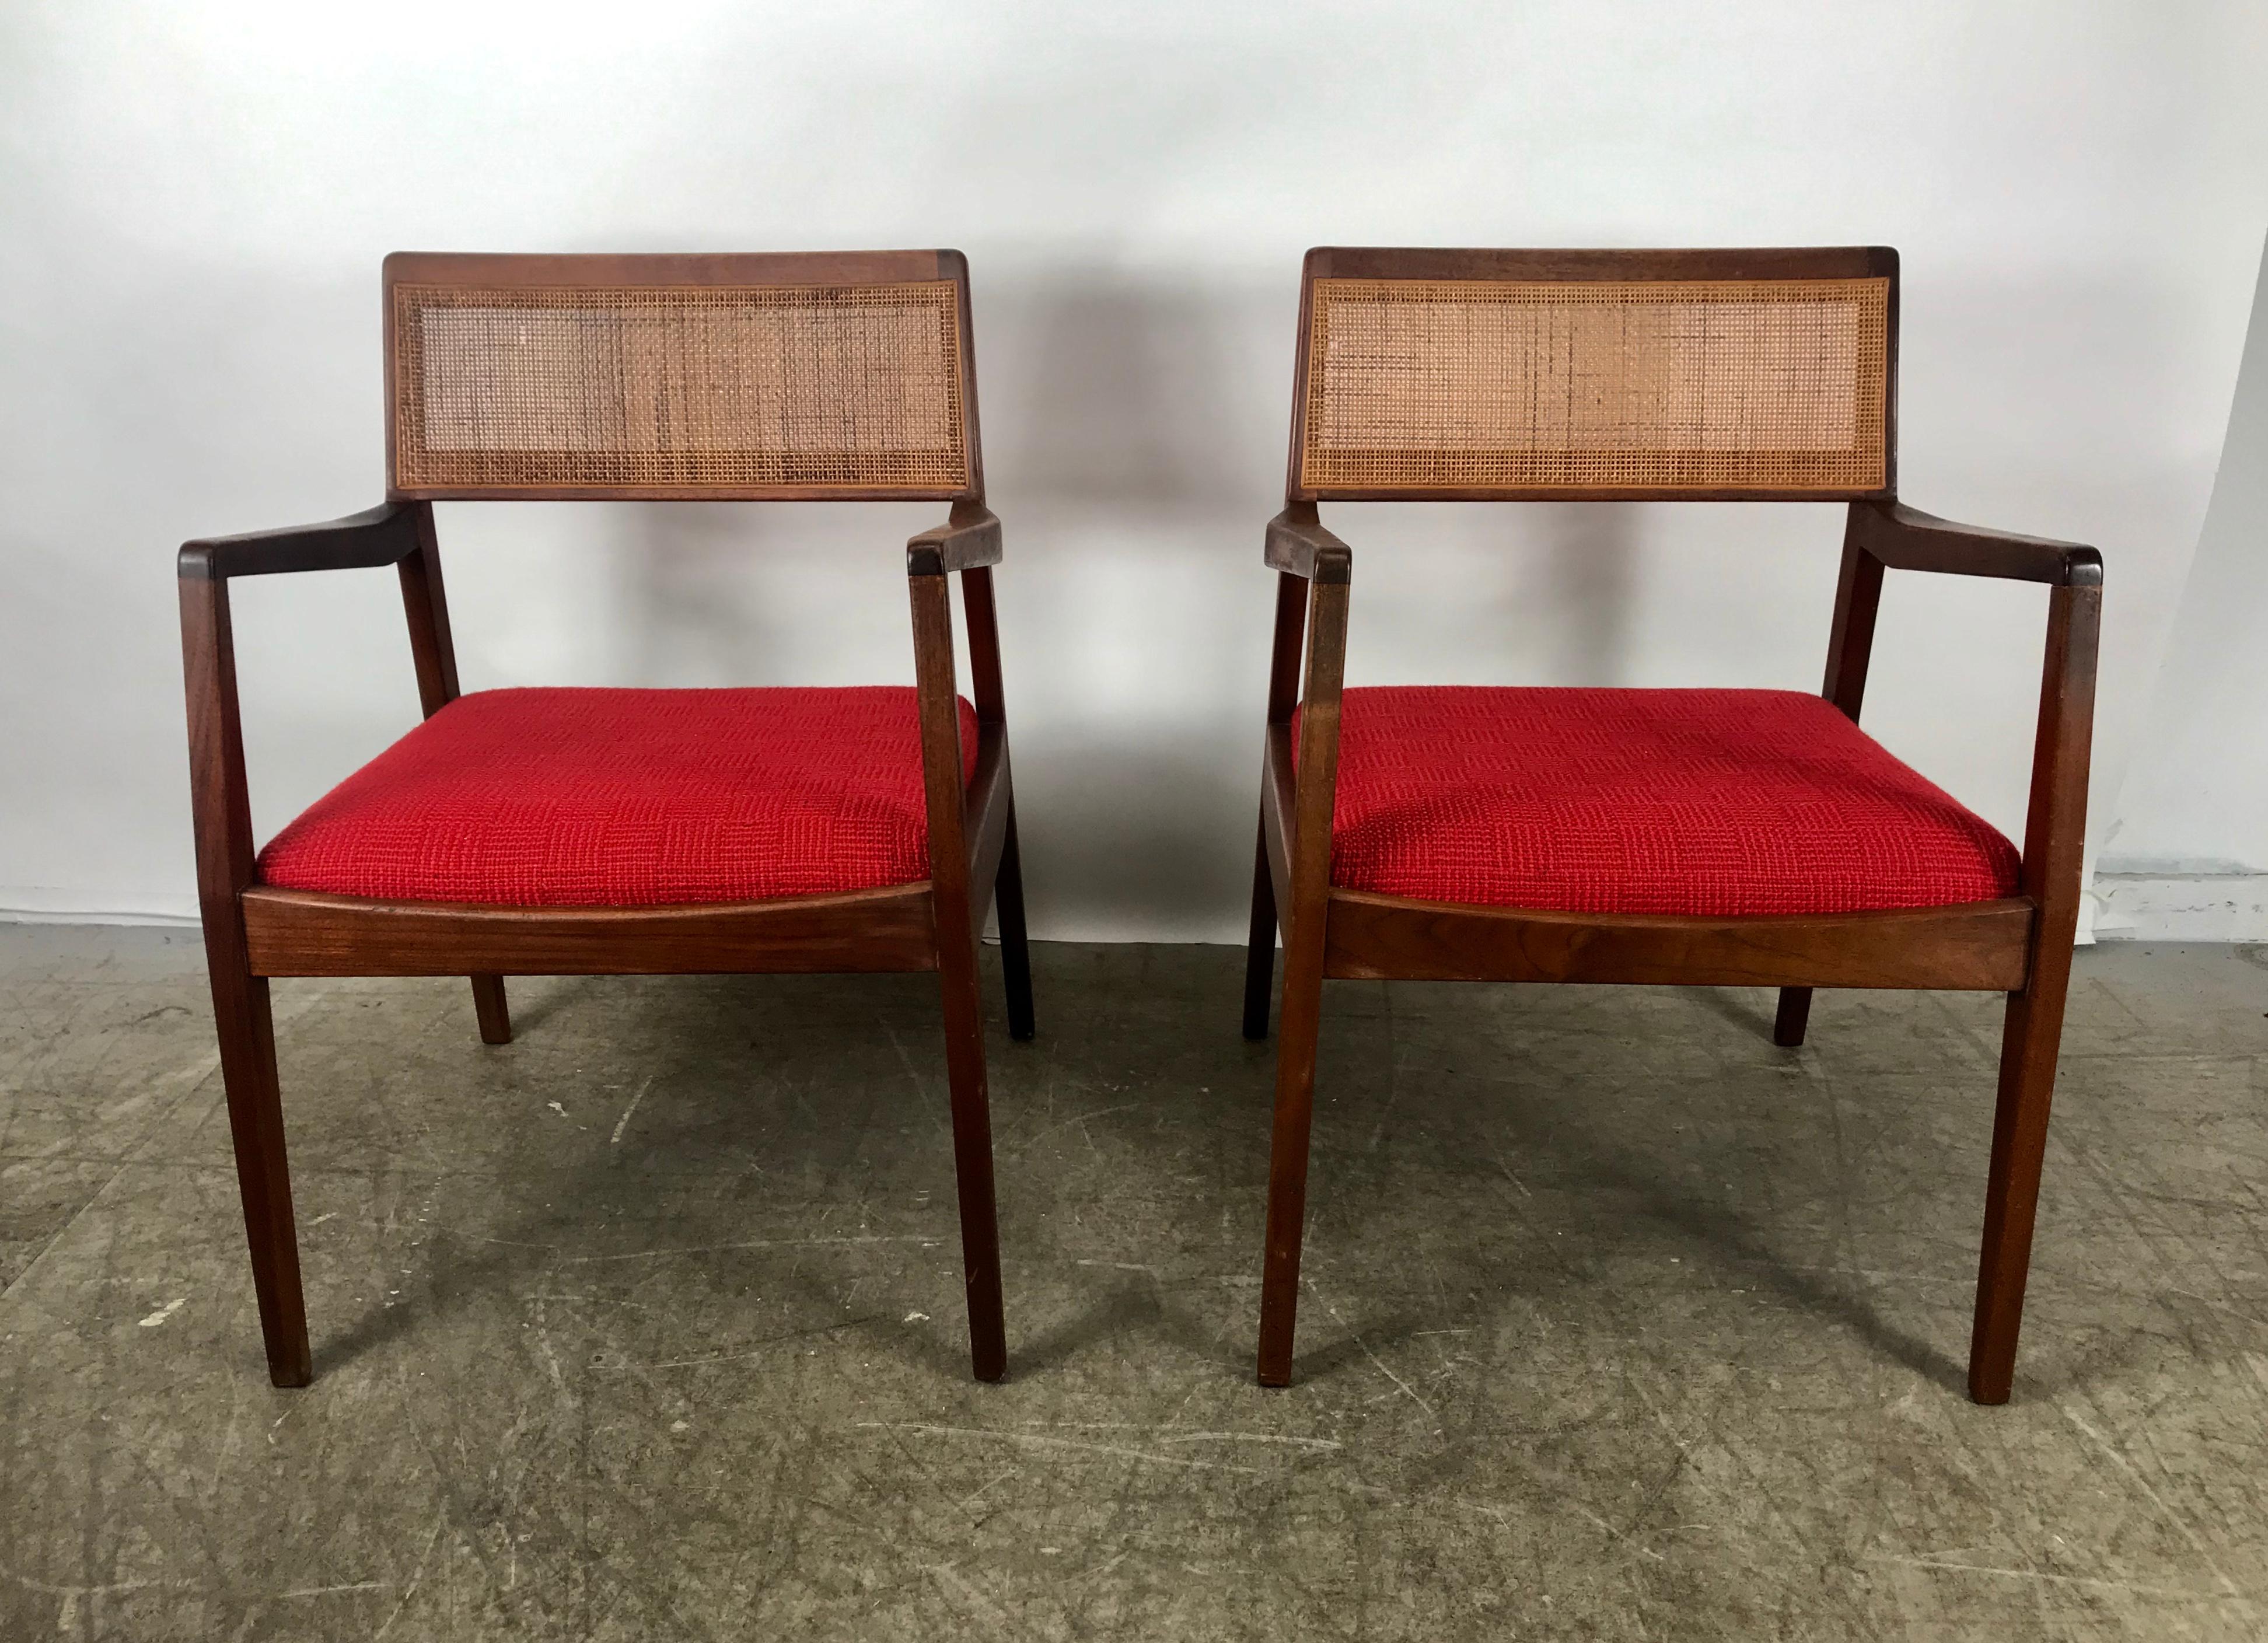 20th Century Matched Pair of Modernist Jens Risom Walnut and Caned Back Lounge Chair